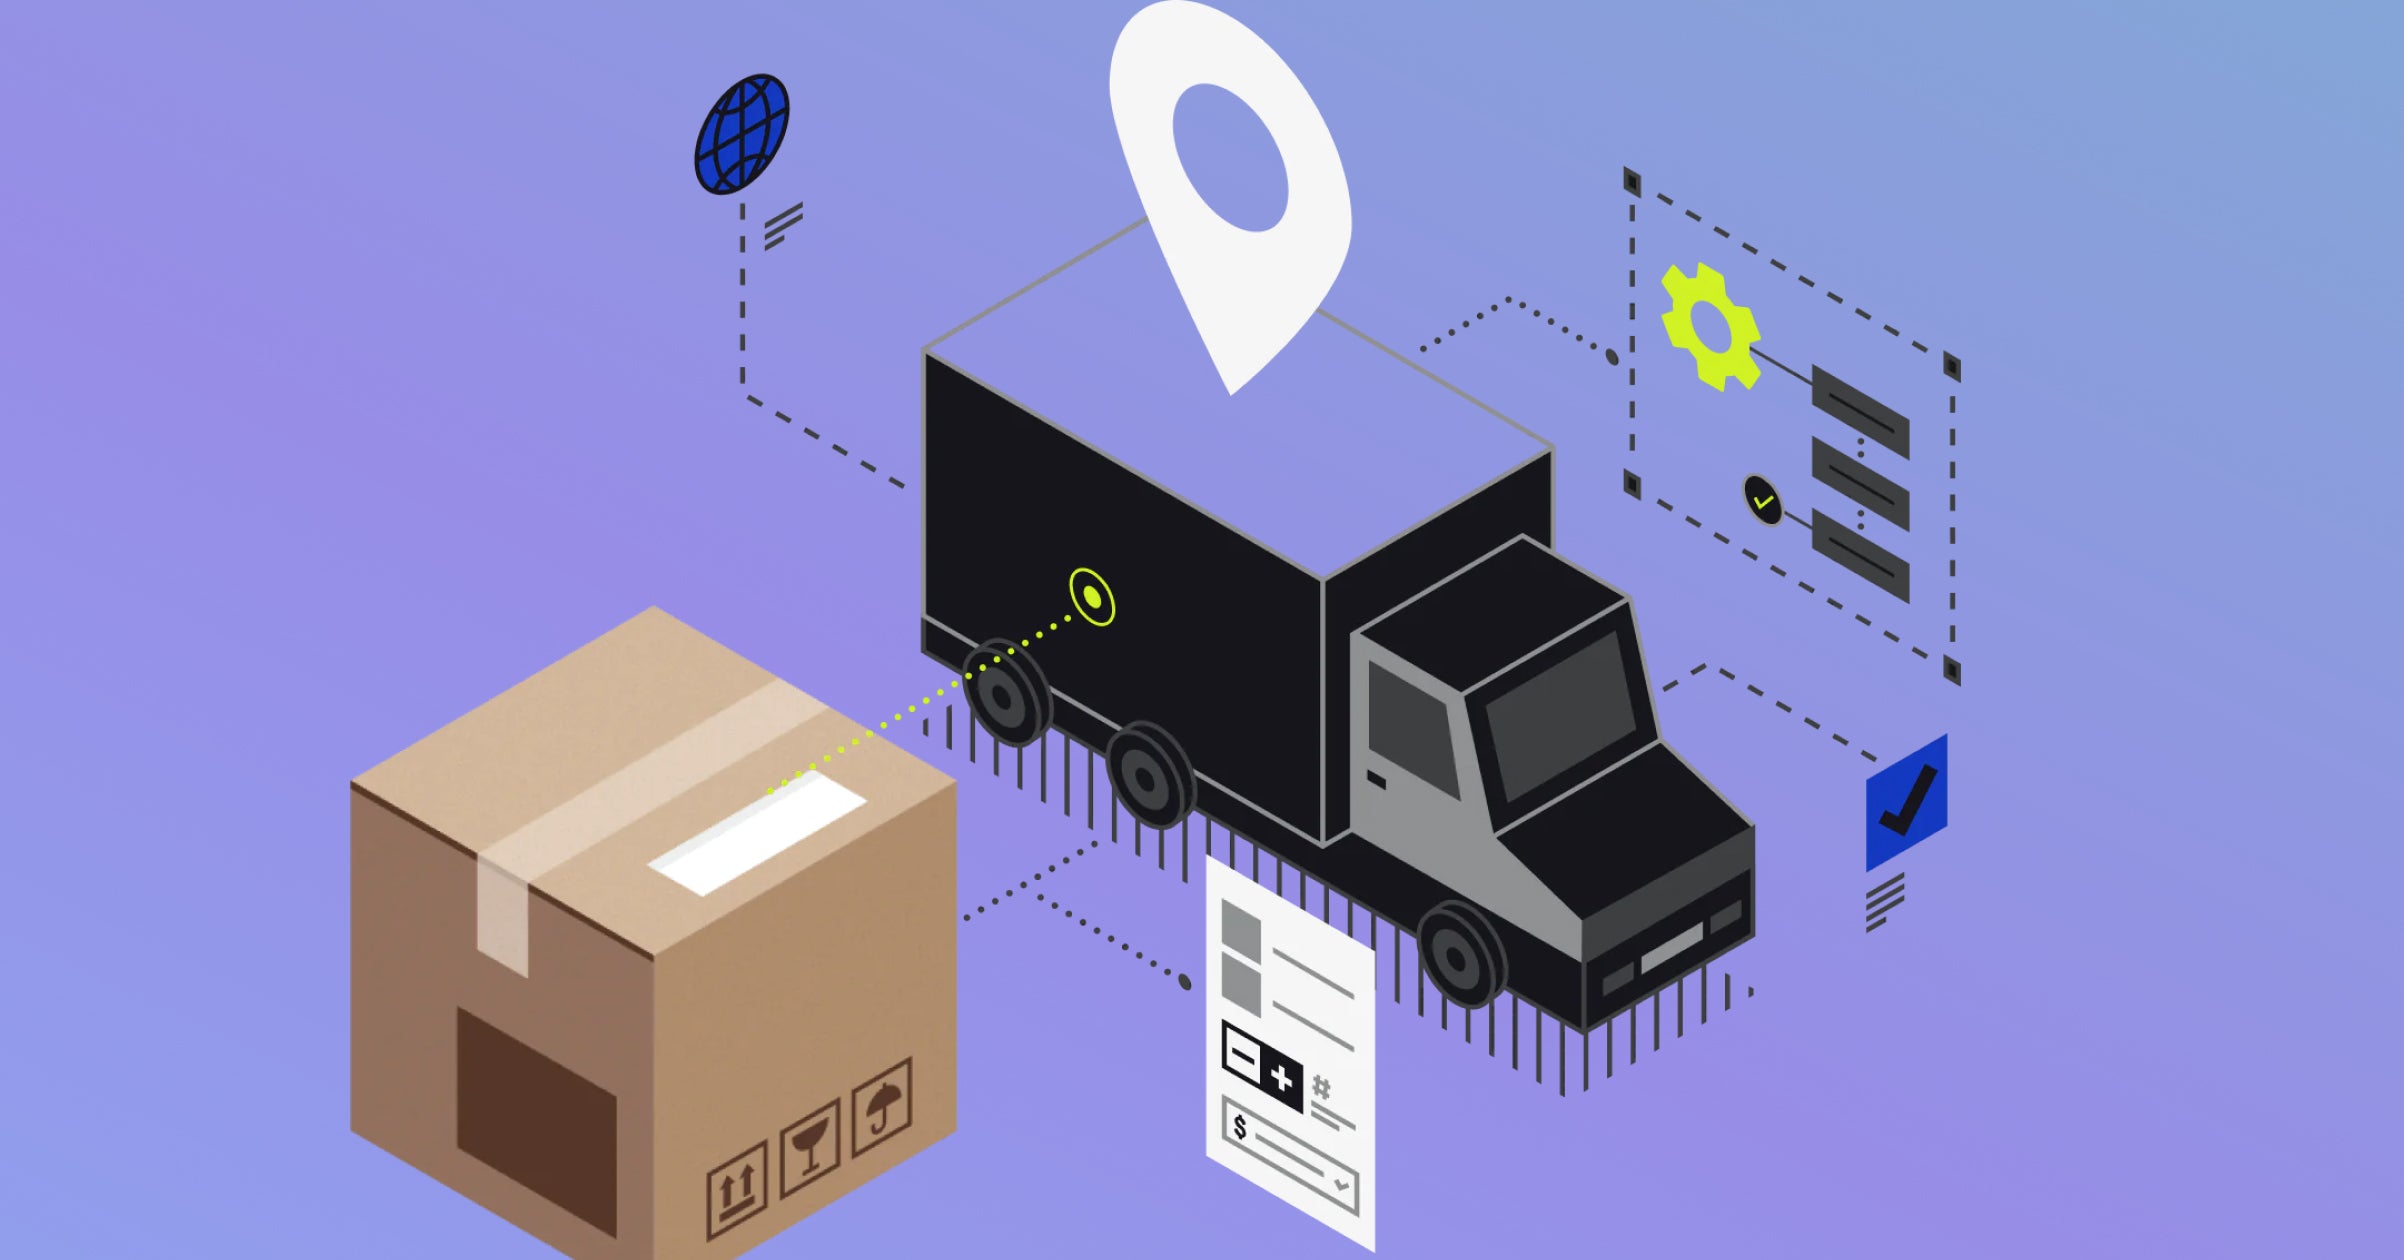 An illustration of a delivery truck, surrounded by a delivery box, delivery label, a large map target icon above the truck, and floating product user interface of Shopify’s order fulfillment view on Admin.